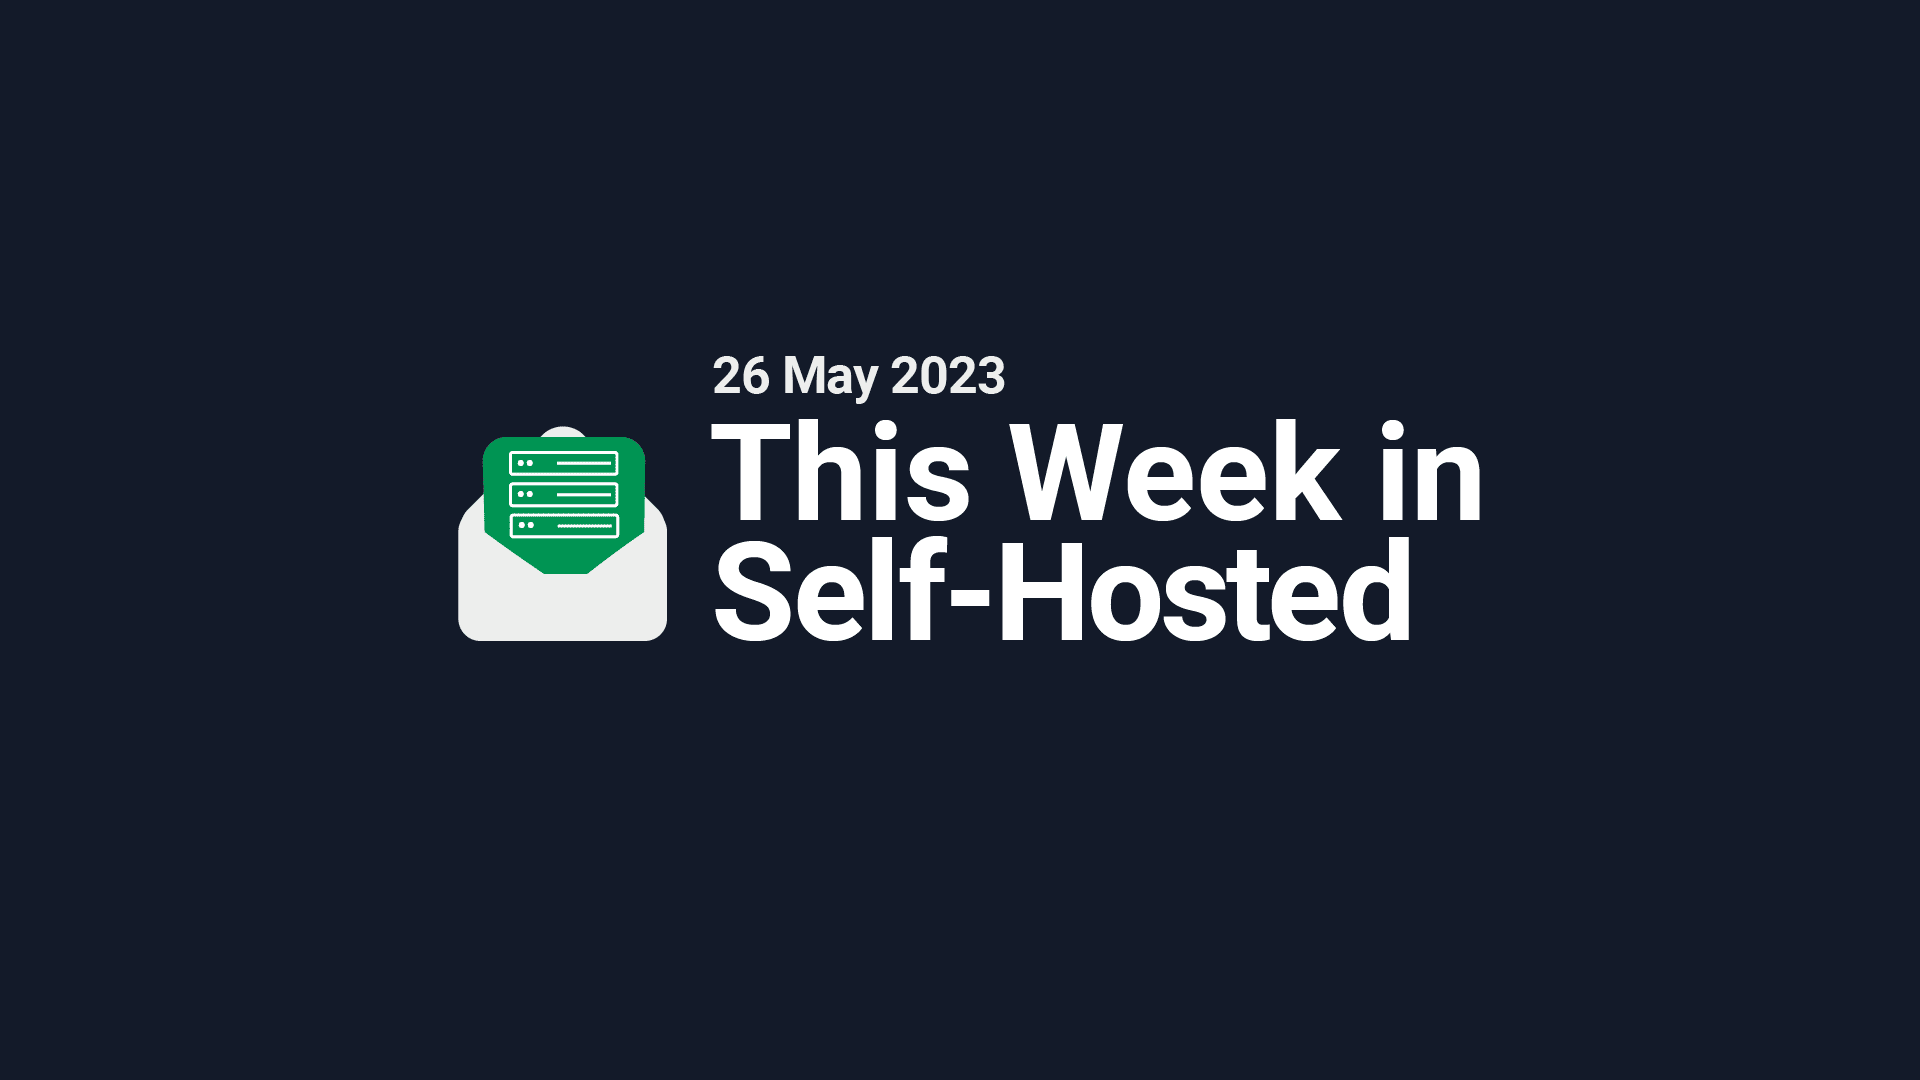 This Week in Self-Hosted (26 May 2023) Post image